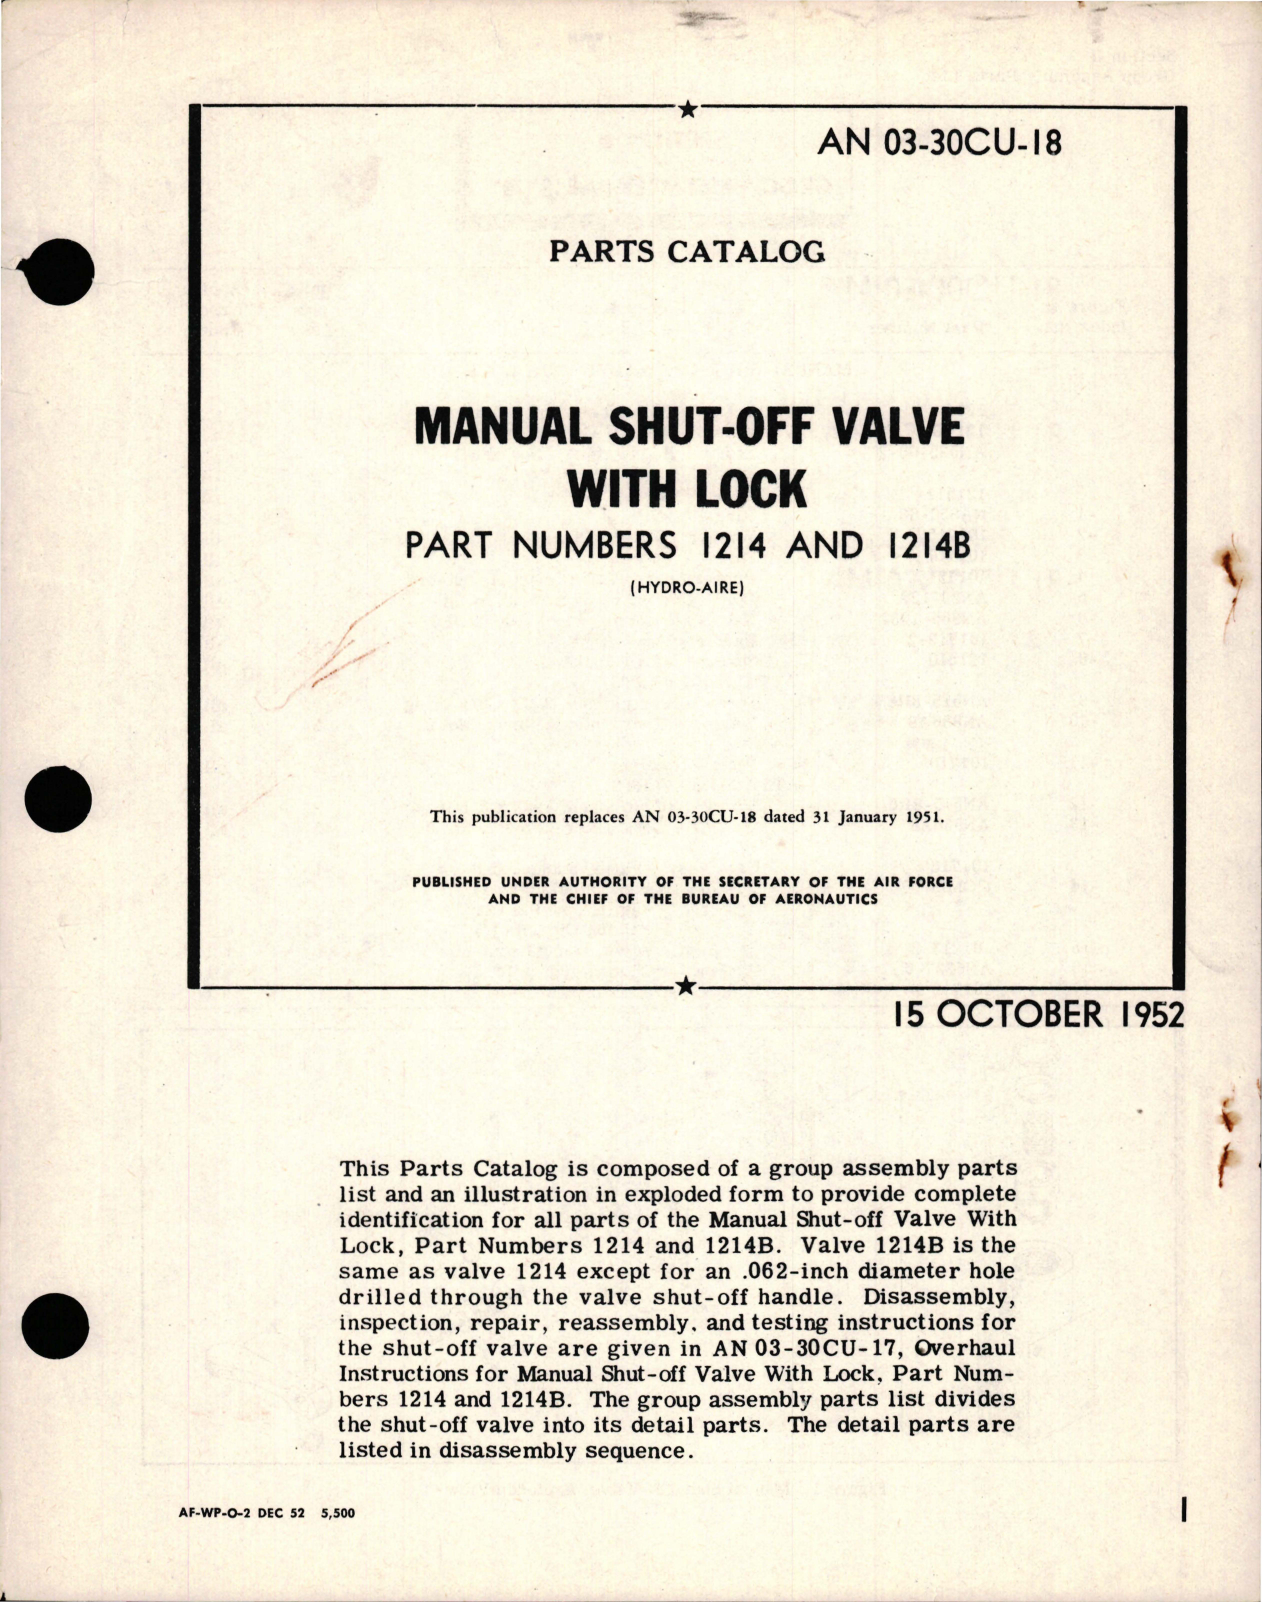 Sample page 1 from AirCorps Library document: Parts Catalog for Manual Shut-Off Valve with Lock - Part 1214 and 1214B